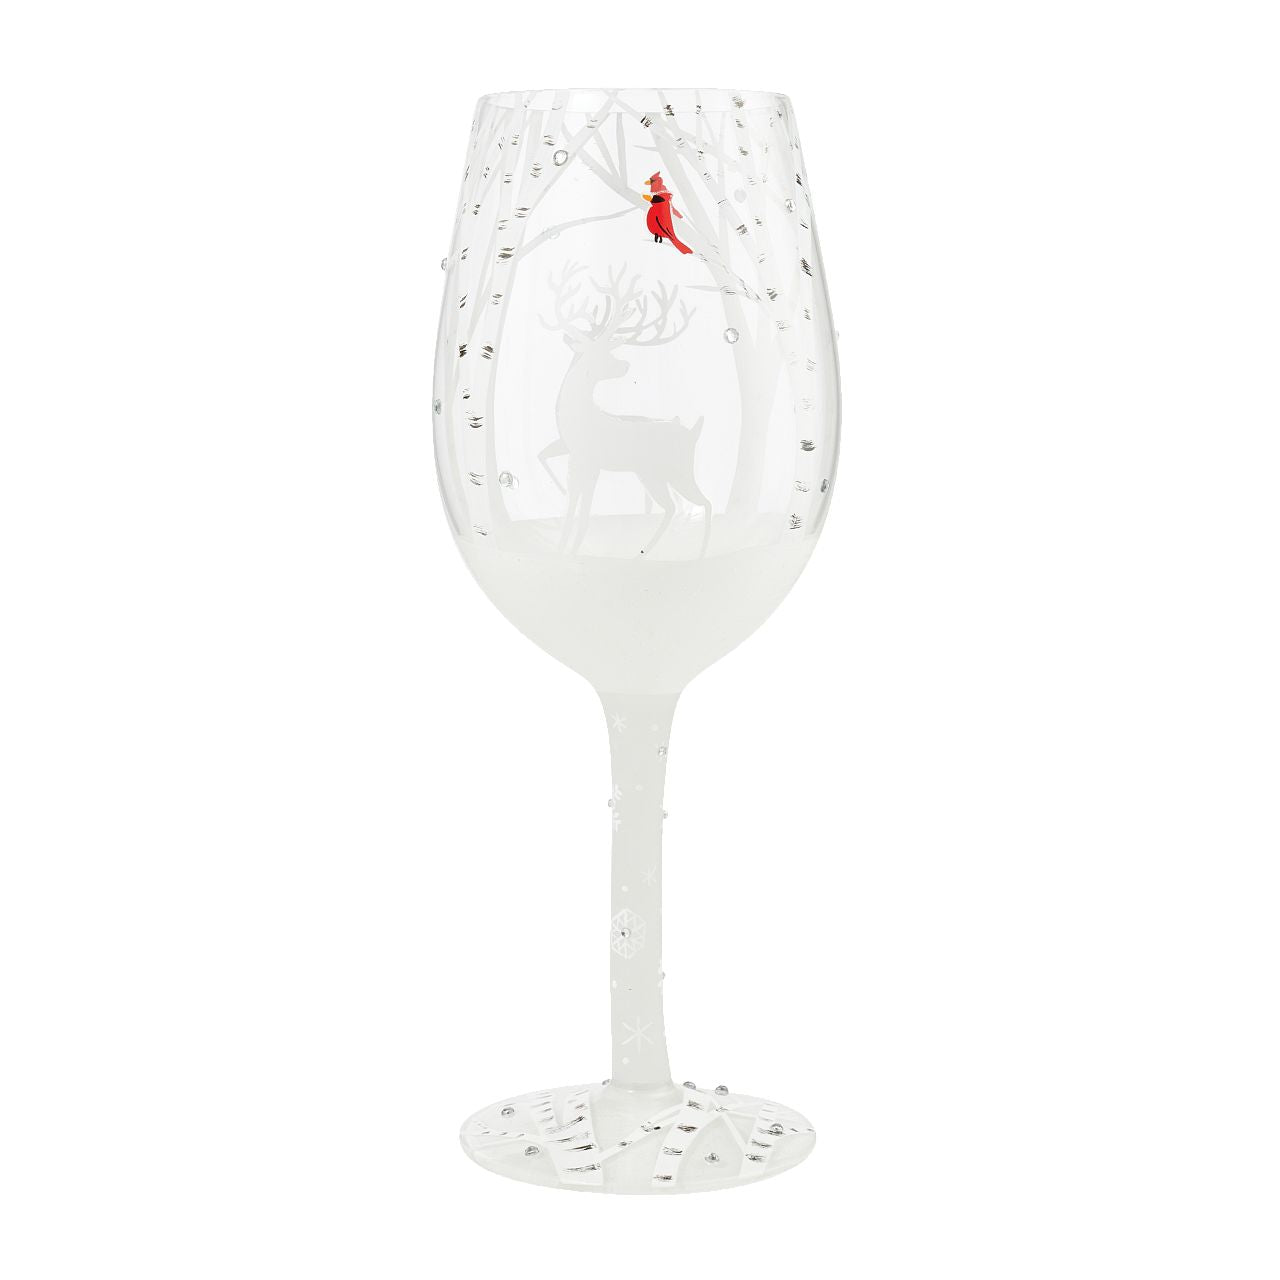 Winter Walk Wine Glass Christmas  Take a Winter Walk with your new favourite wine glass by Lolita. Showing a beautiful white Christmas scene with a bright red cardinal this will be a show stopper at your next Christmas dinner. Adorned with glitter, stones, reindeer and snow this is the perfect holiday glass.